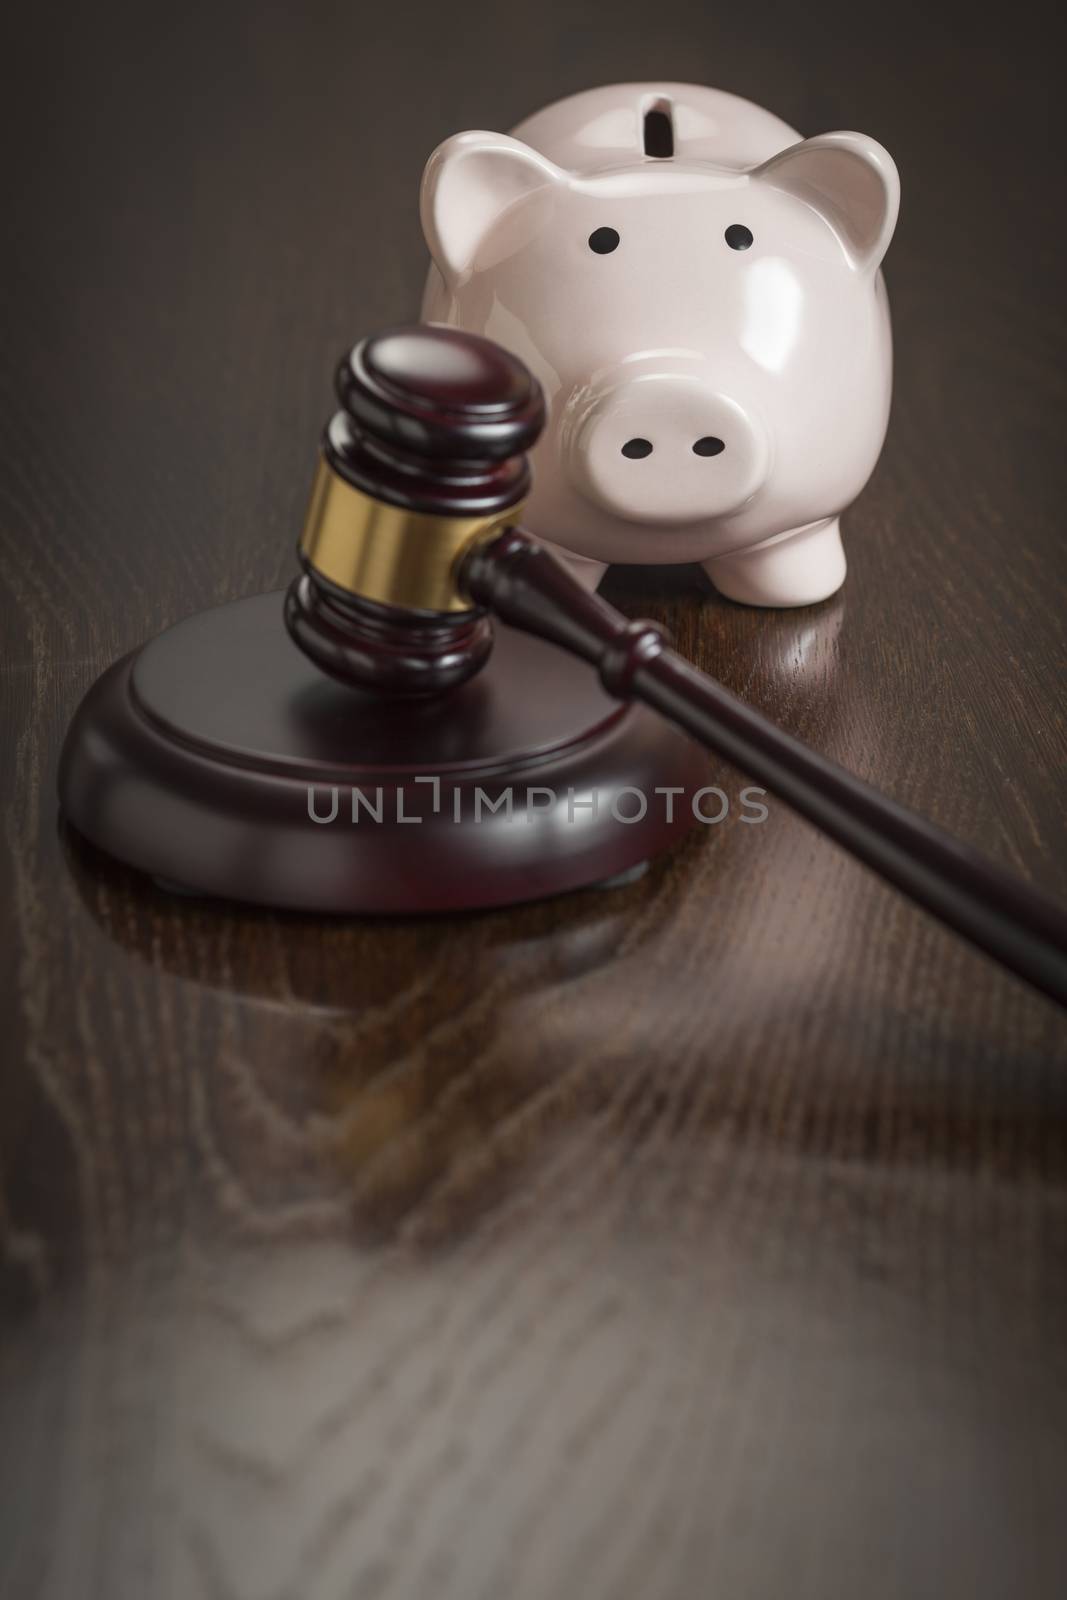 Gavel and Piggy Bank on Reflective Wooden Table.